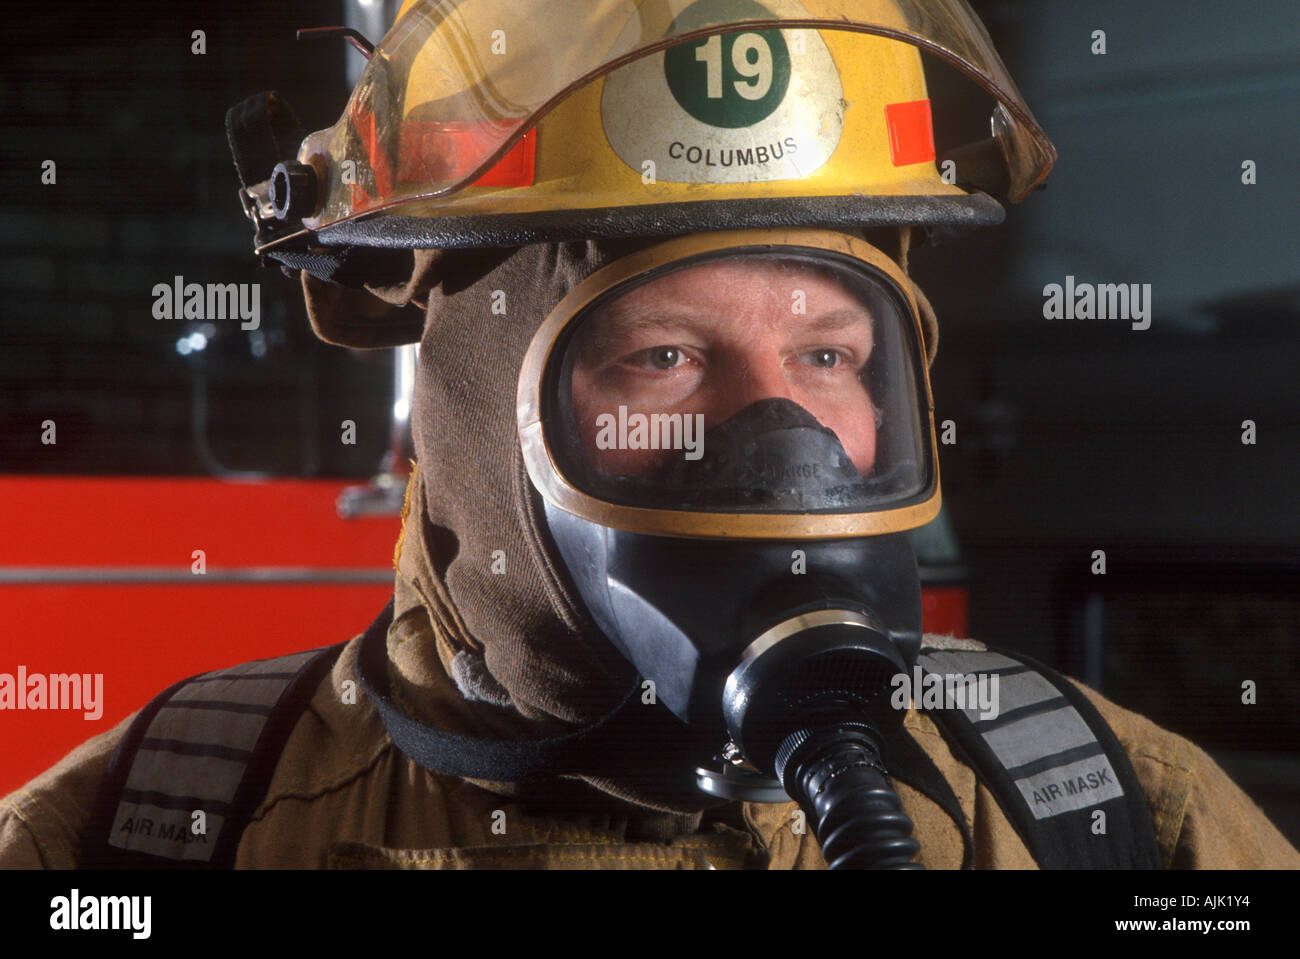 Firefighter in protective gear Stock Photo